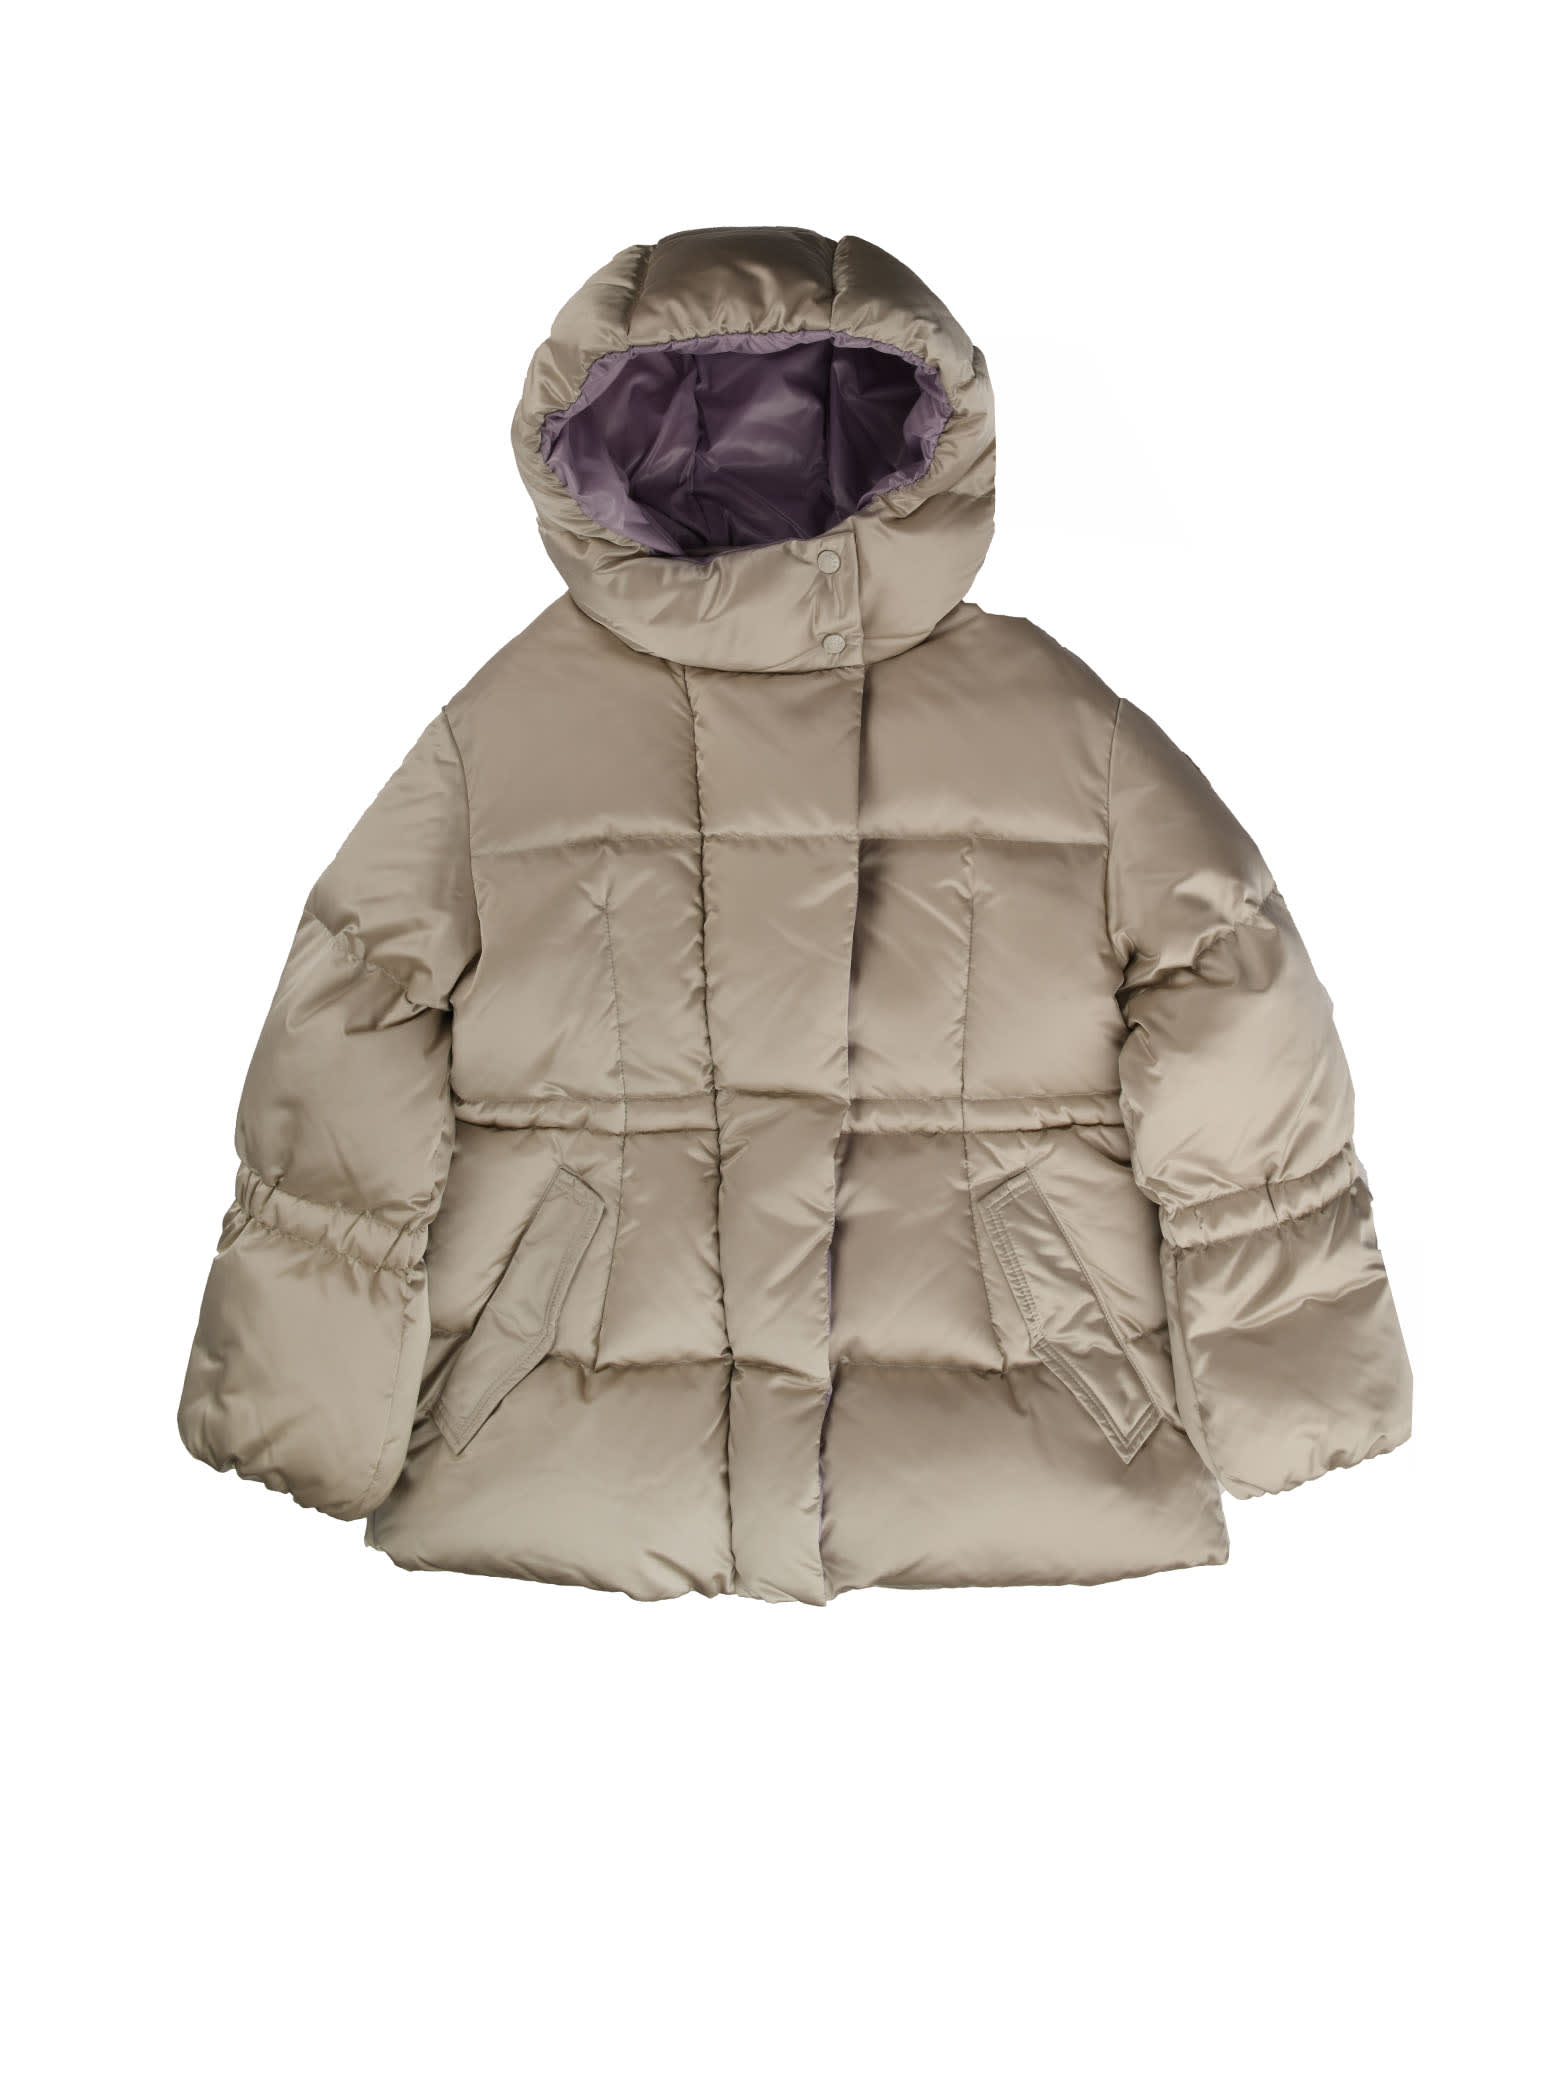 Moncler Glossy Gray Hooded Jacket